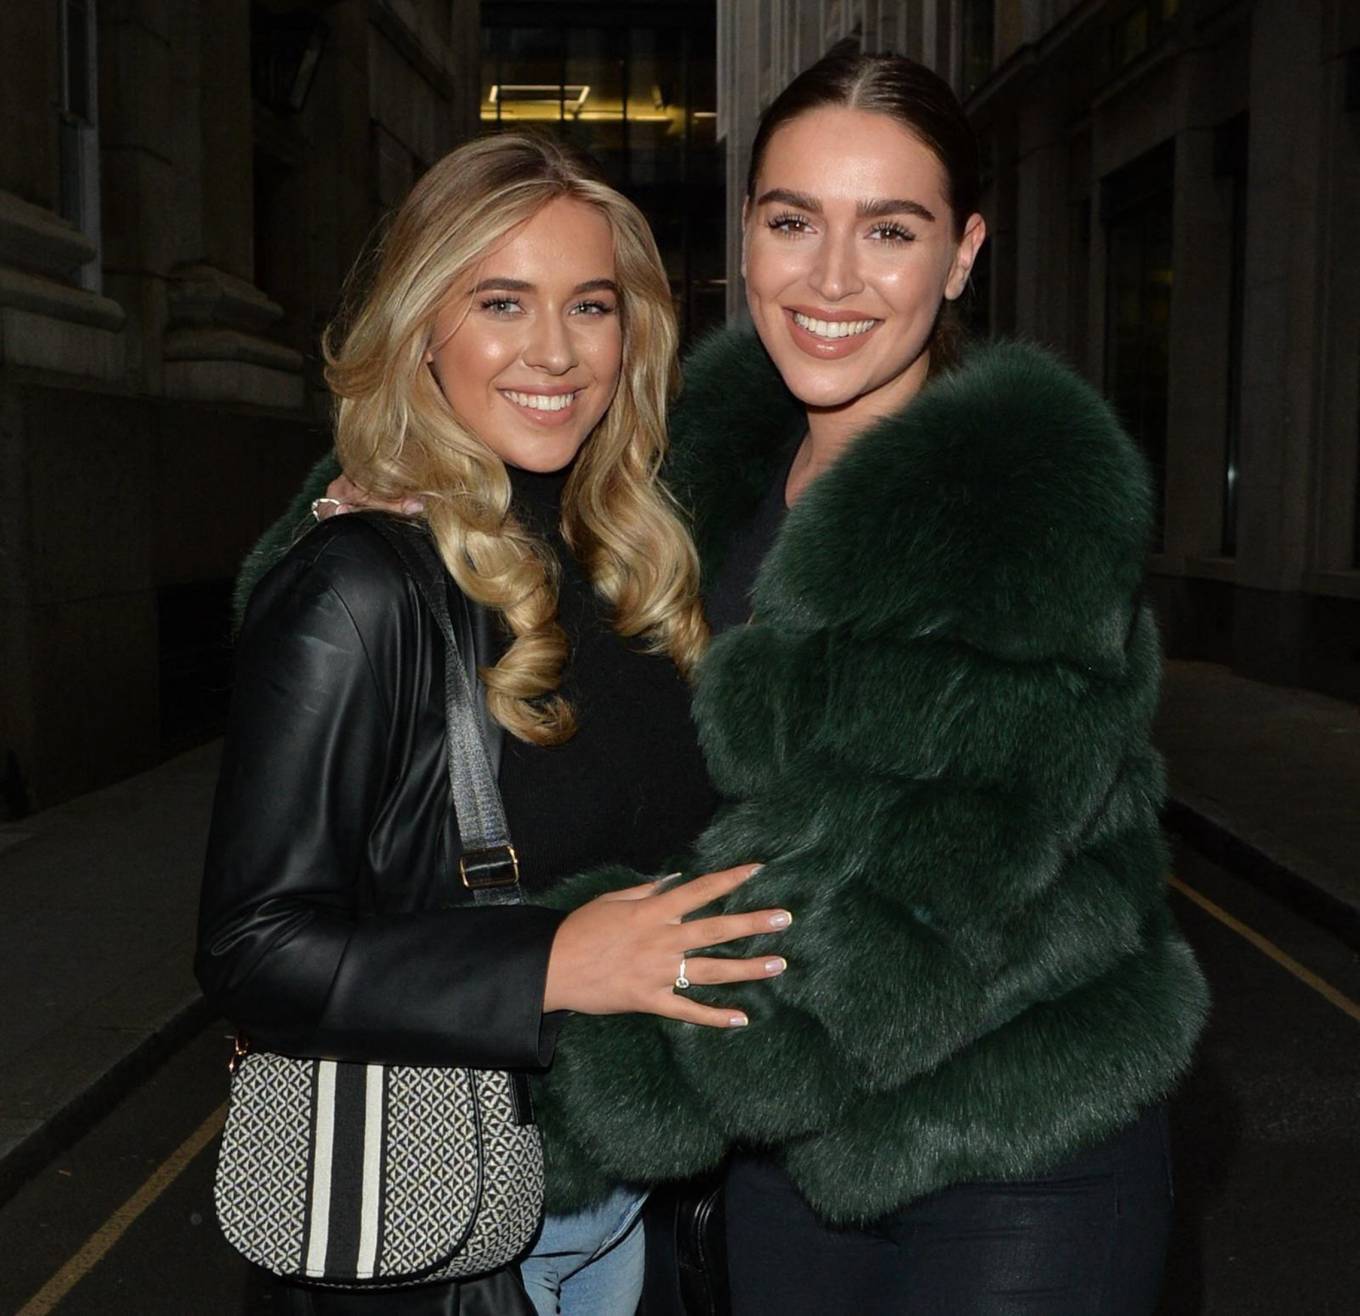 Chloe Ross 2021 : Chloe Ross – With sister Maddy Ross night out at Madisons roof bar in London-08